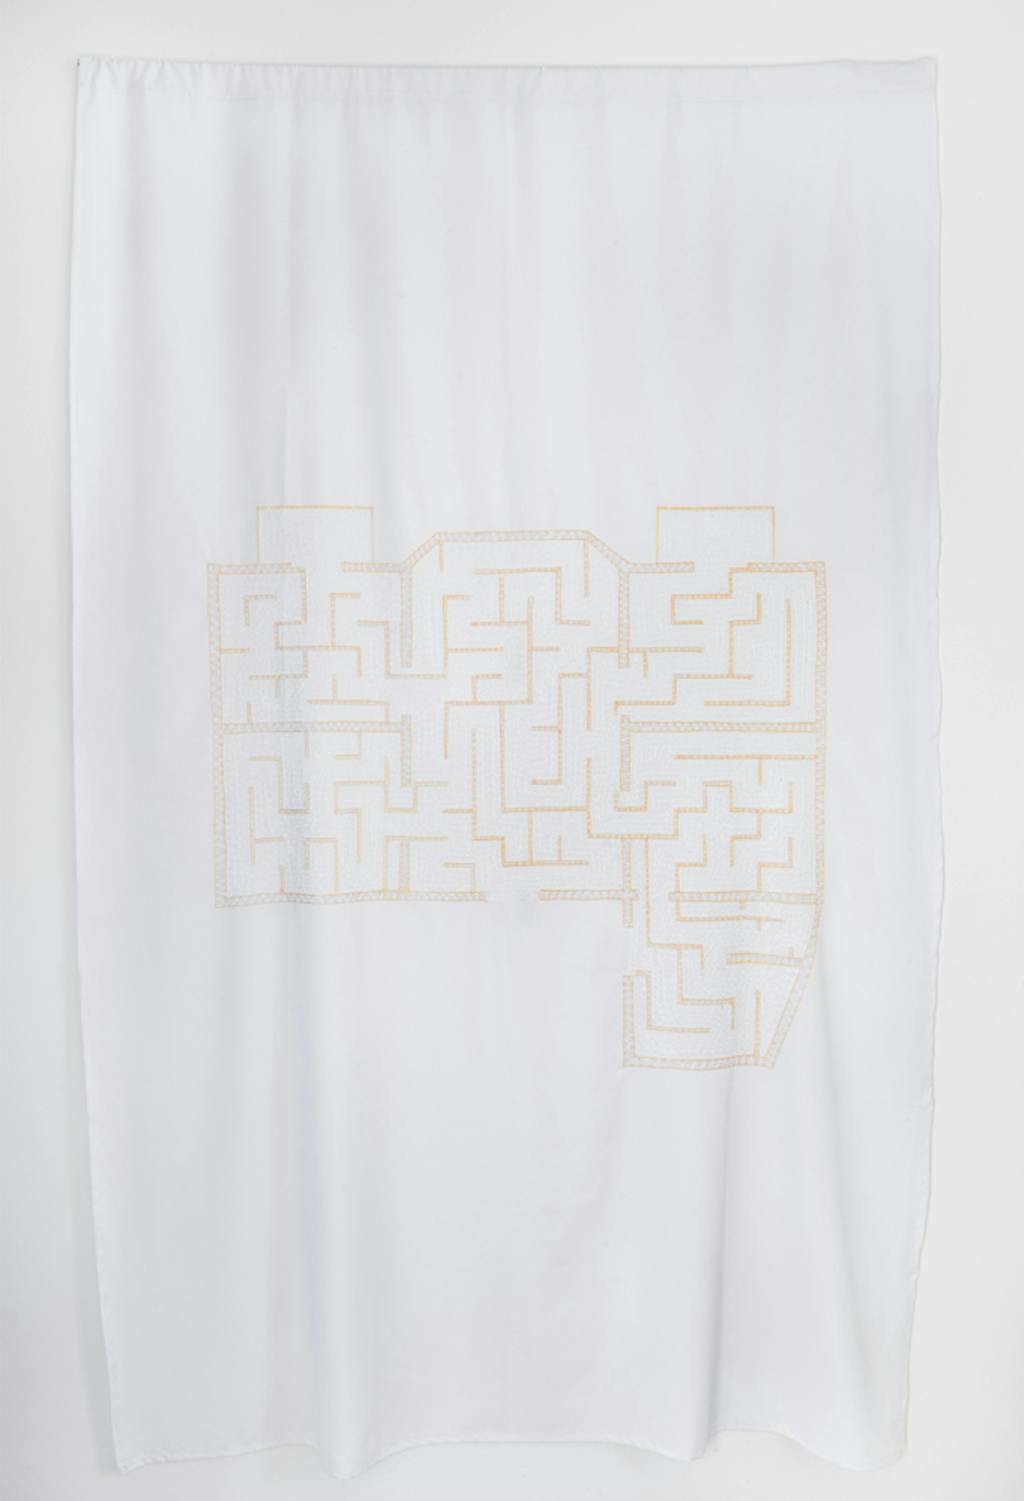 Stéphanie Saadé, We’ve Been Swallowed by Our Houses, 2020, Aghabani embroidery on cotton cloth, 240 X 140 cm, Variation 2/3

During lockdown, the artist measured her apartment in Lebanon and drew a map of it, which she then turned into a navigable labyrinth. It is embroidered using a traditional technique composed of chain-stitches and spiral patterns. - © Image courtesy of the artist and Grey Noise, Dubai, Paris Internationale